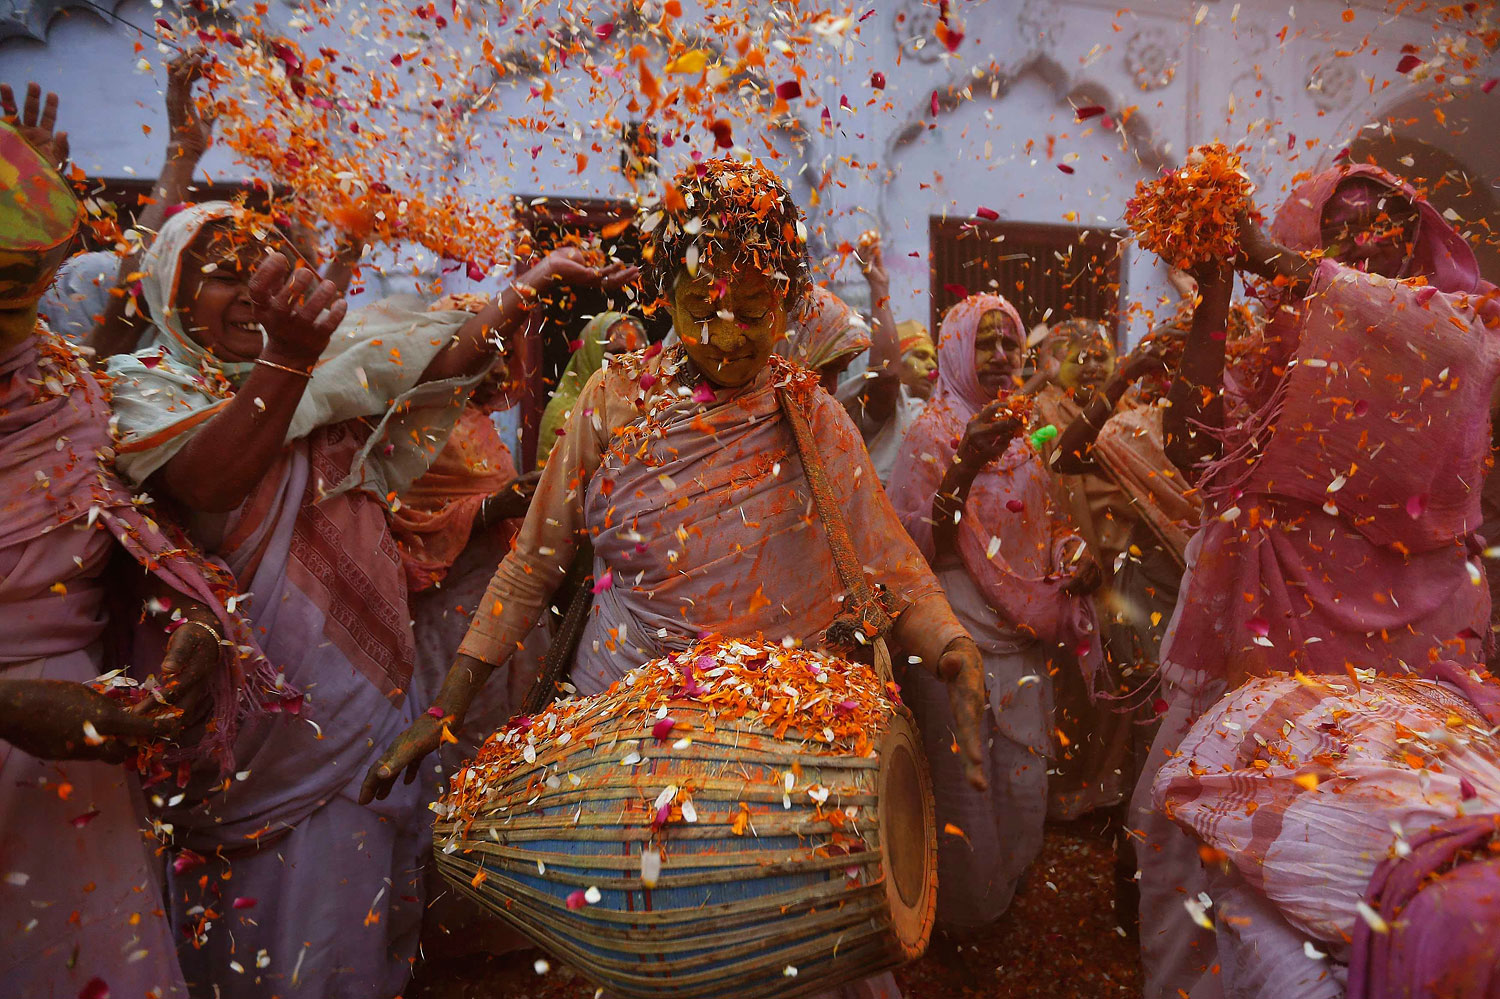 Widows dance as they throw flowers into the air during Holi celebrations organised by non-governmental organisation Sulabh International at a widows' ashram in Vrindavan in the northern Indian state of Uttar Pradesh, March 17, 2014.